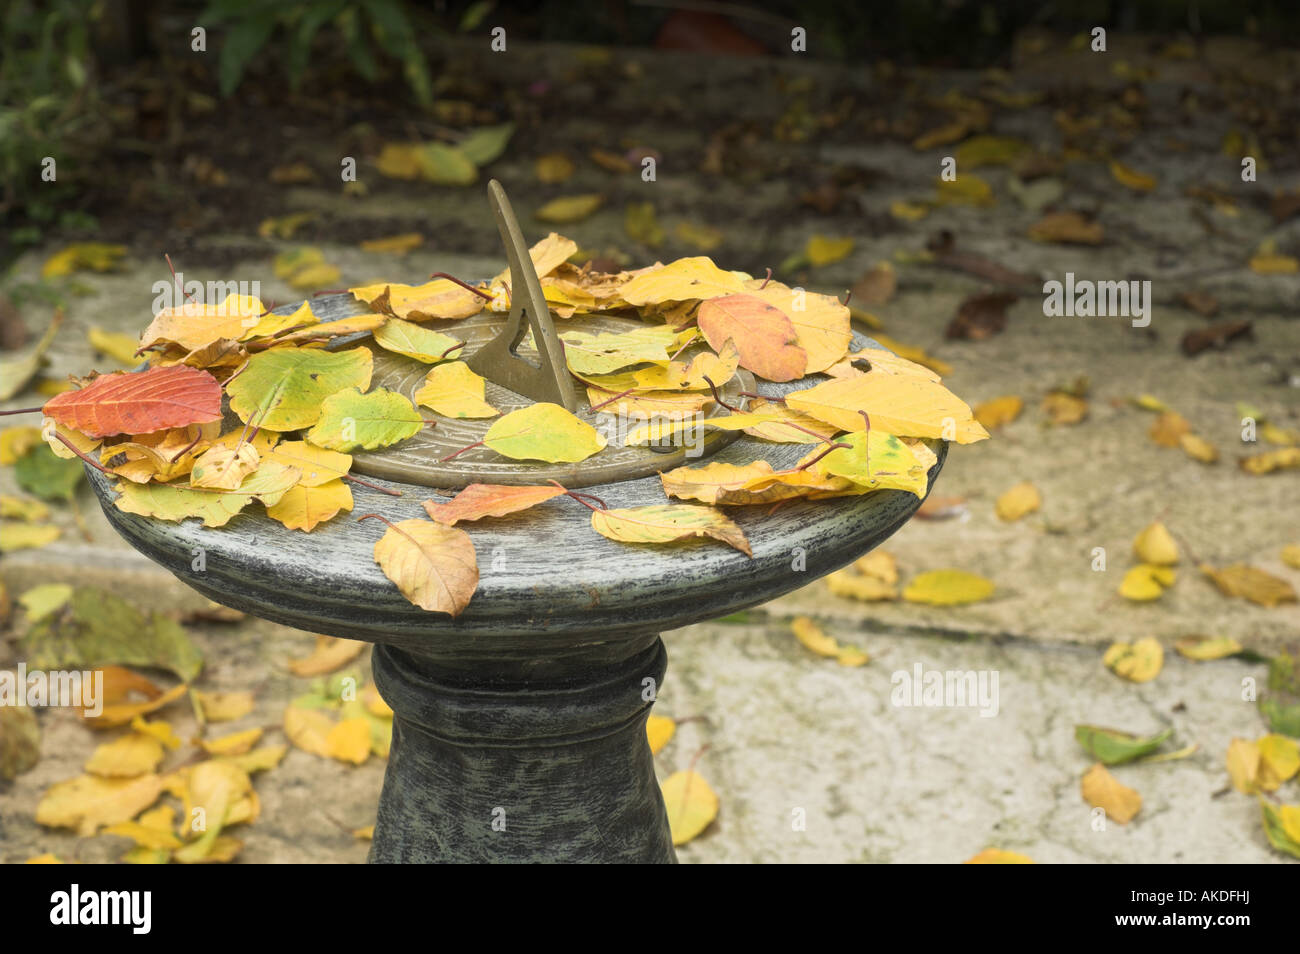 Garden sundial on patio covered with colourful autumn leaves Stock Photo